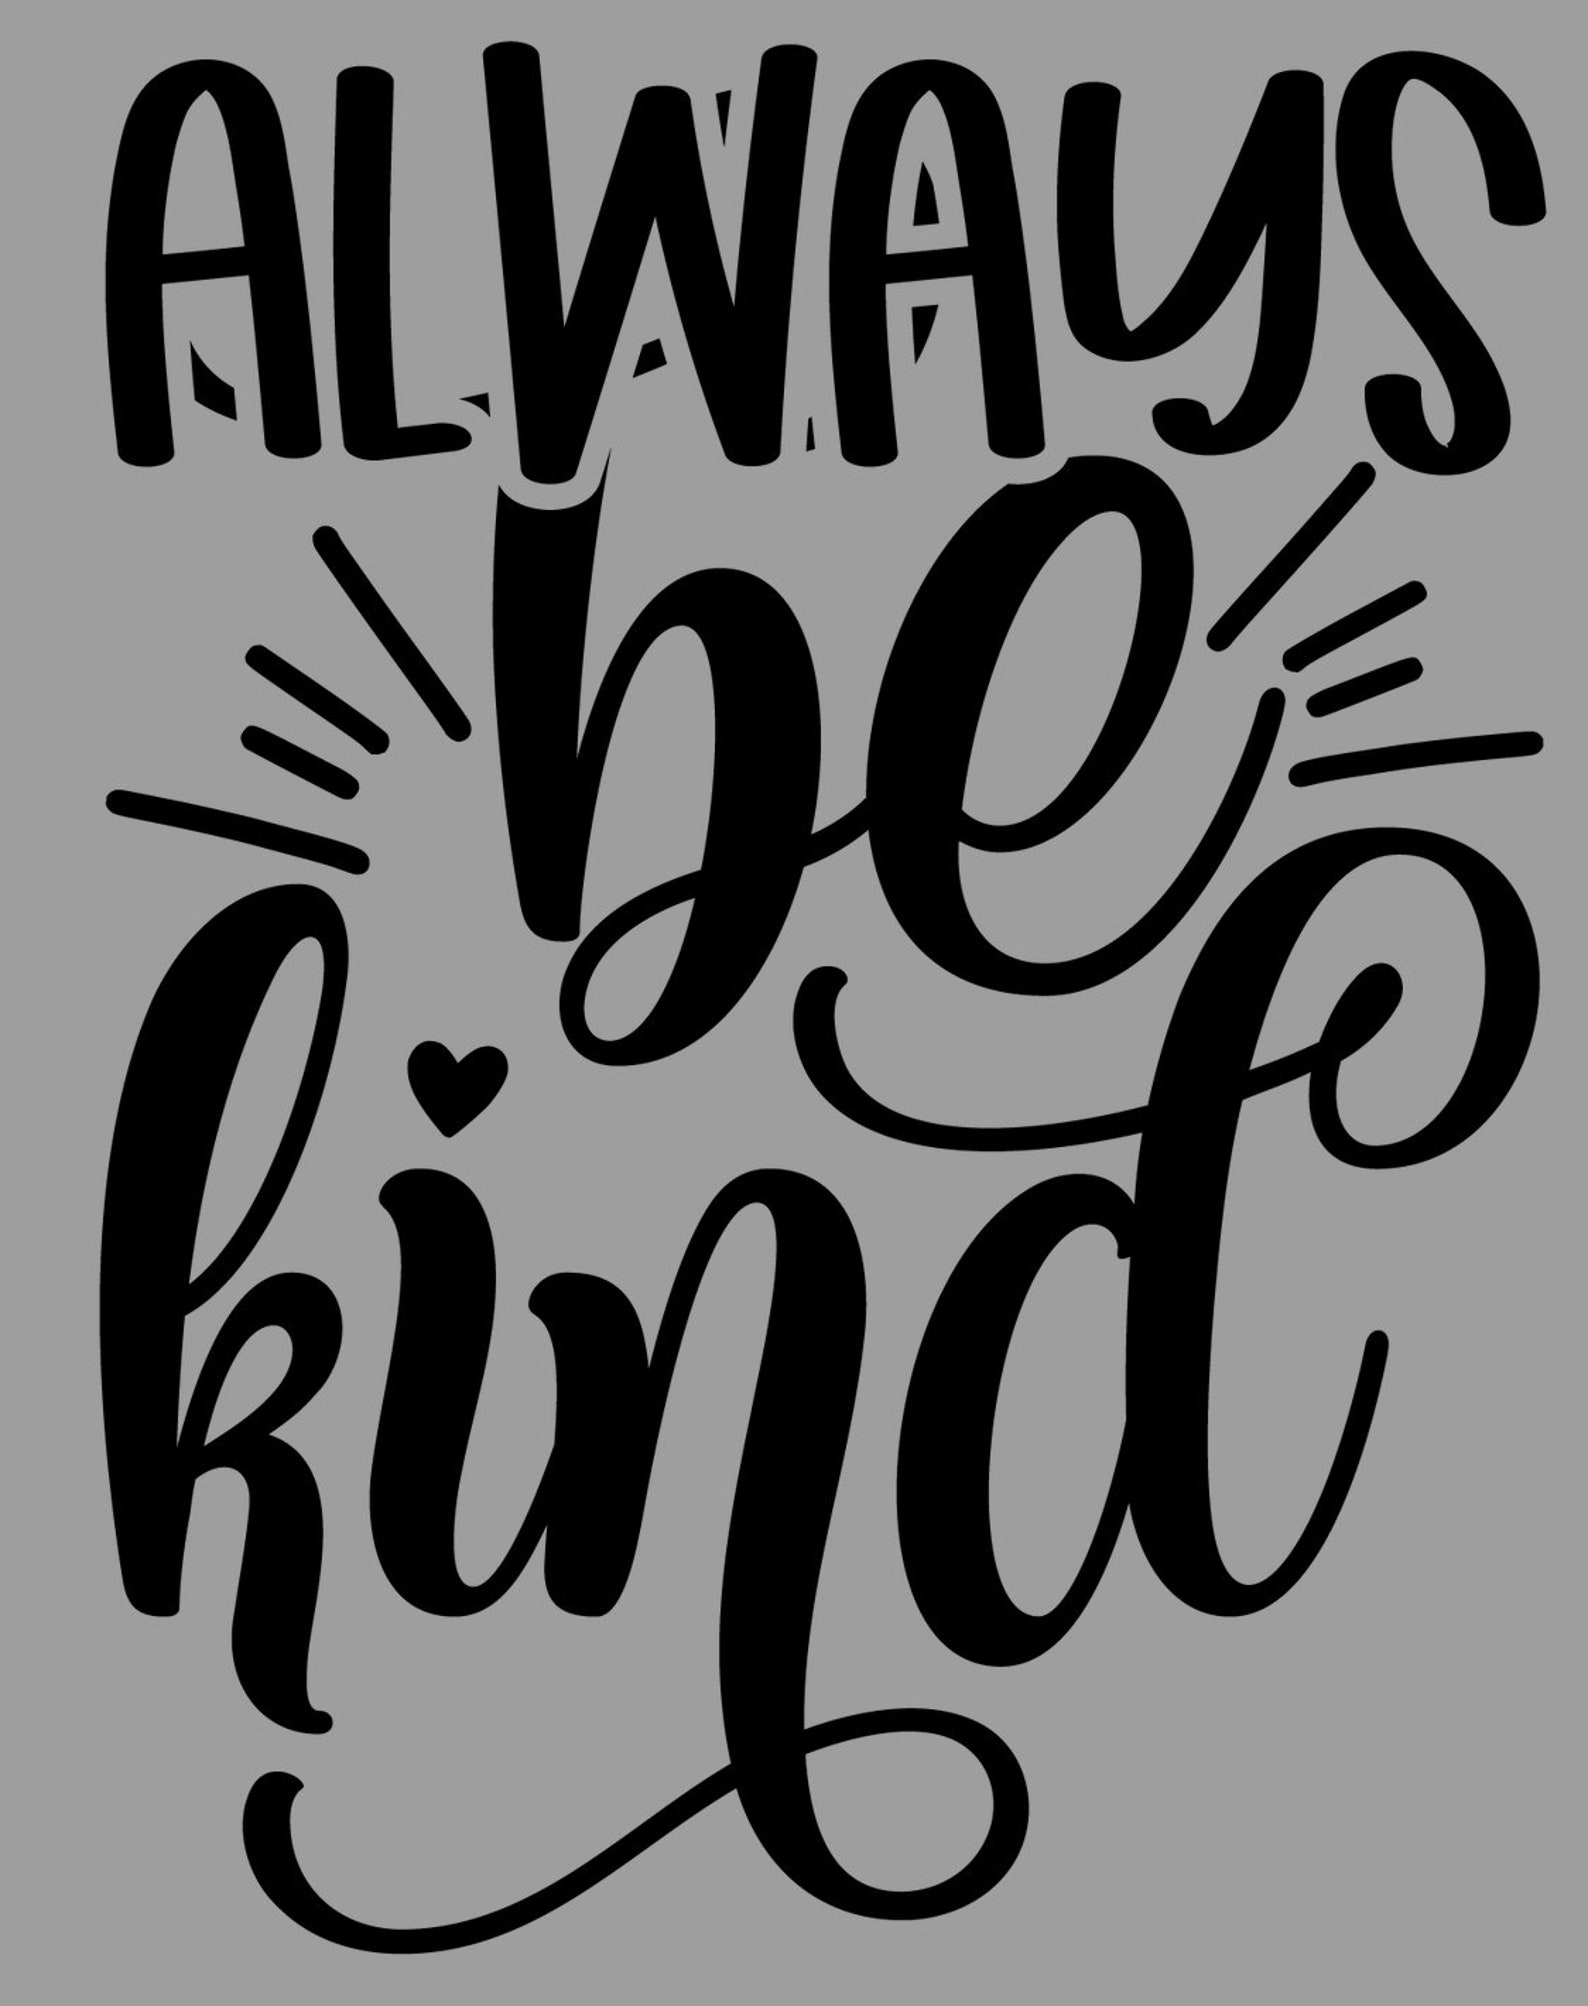 Always Be Kind: Motivational Vector w/Print/CutFiles | Etsy